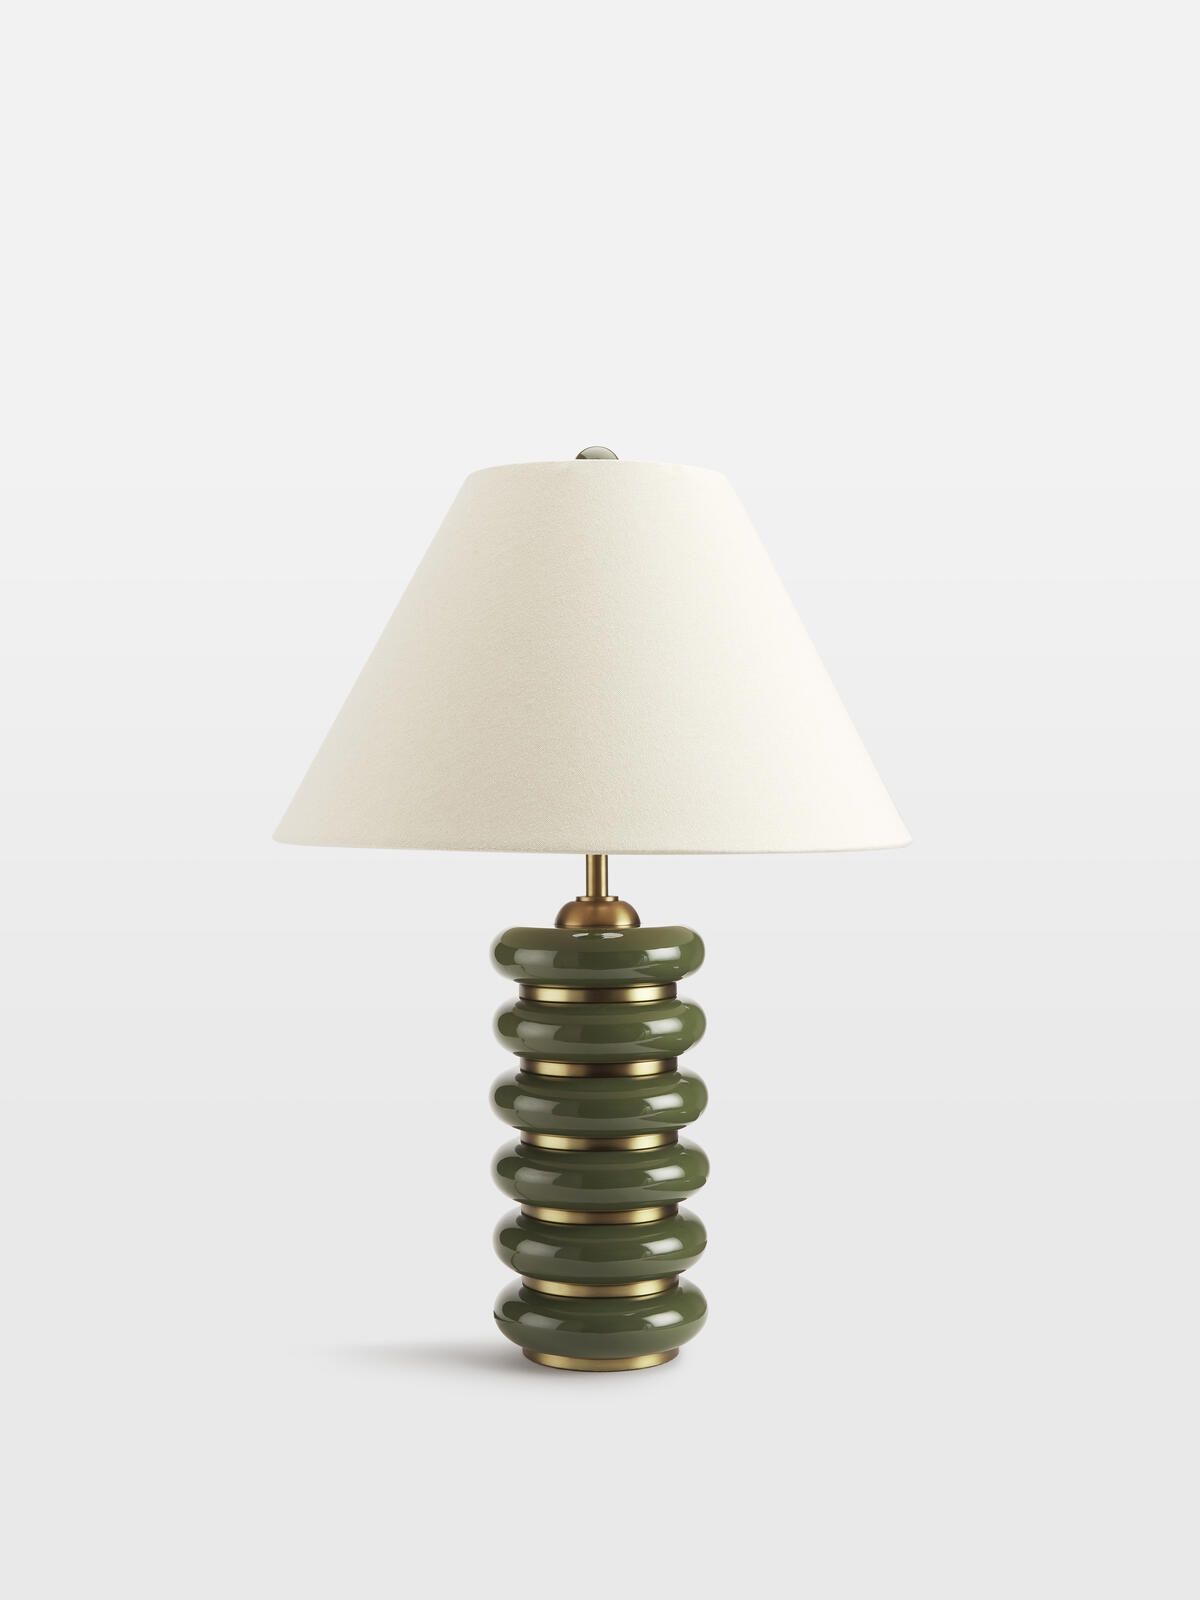 Greyson Table Lamp, High Gloss Lacquer, Olive | Soho Home Ltd